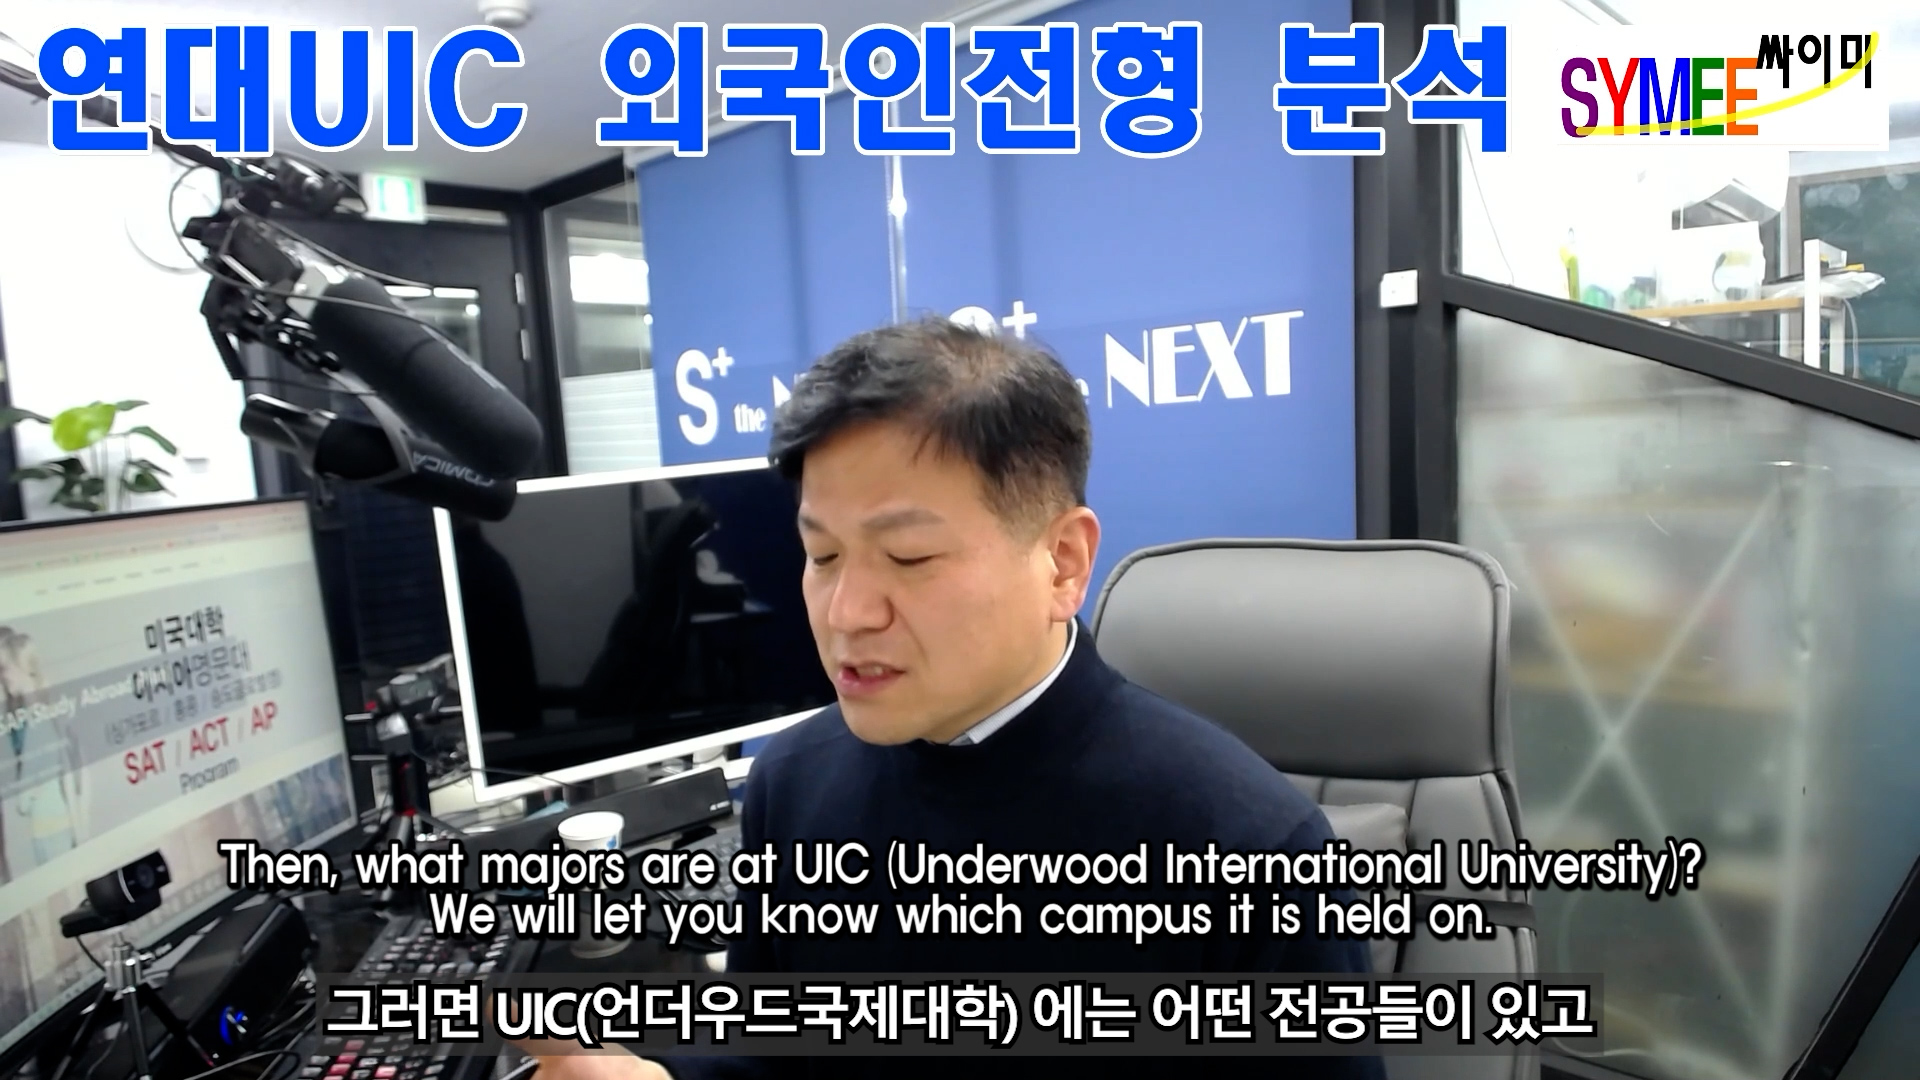 Yonsei Univ. Admission for UIC for Foreign Student 05 Majors.00_00_02_50.스틸 001.jpg